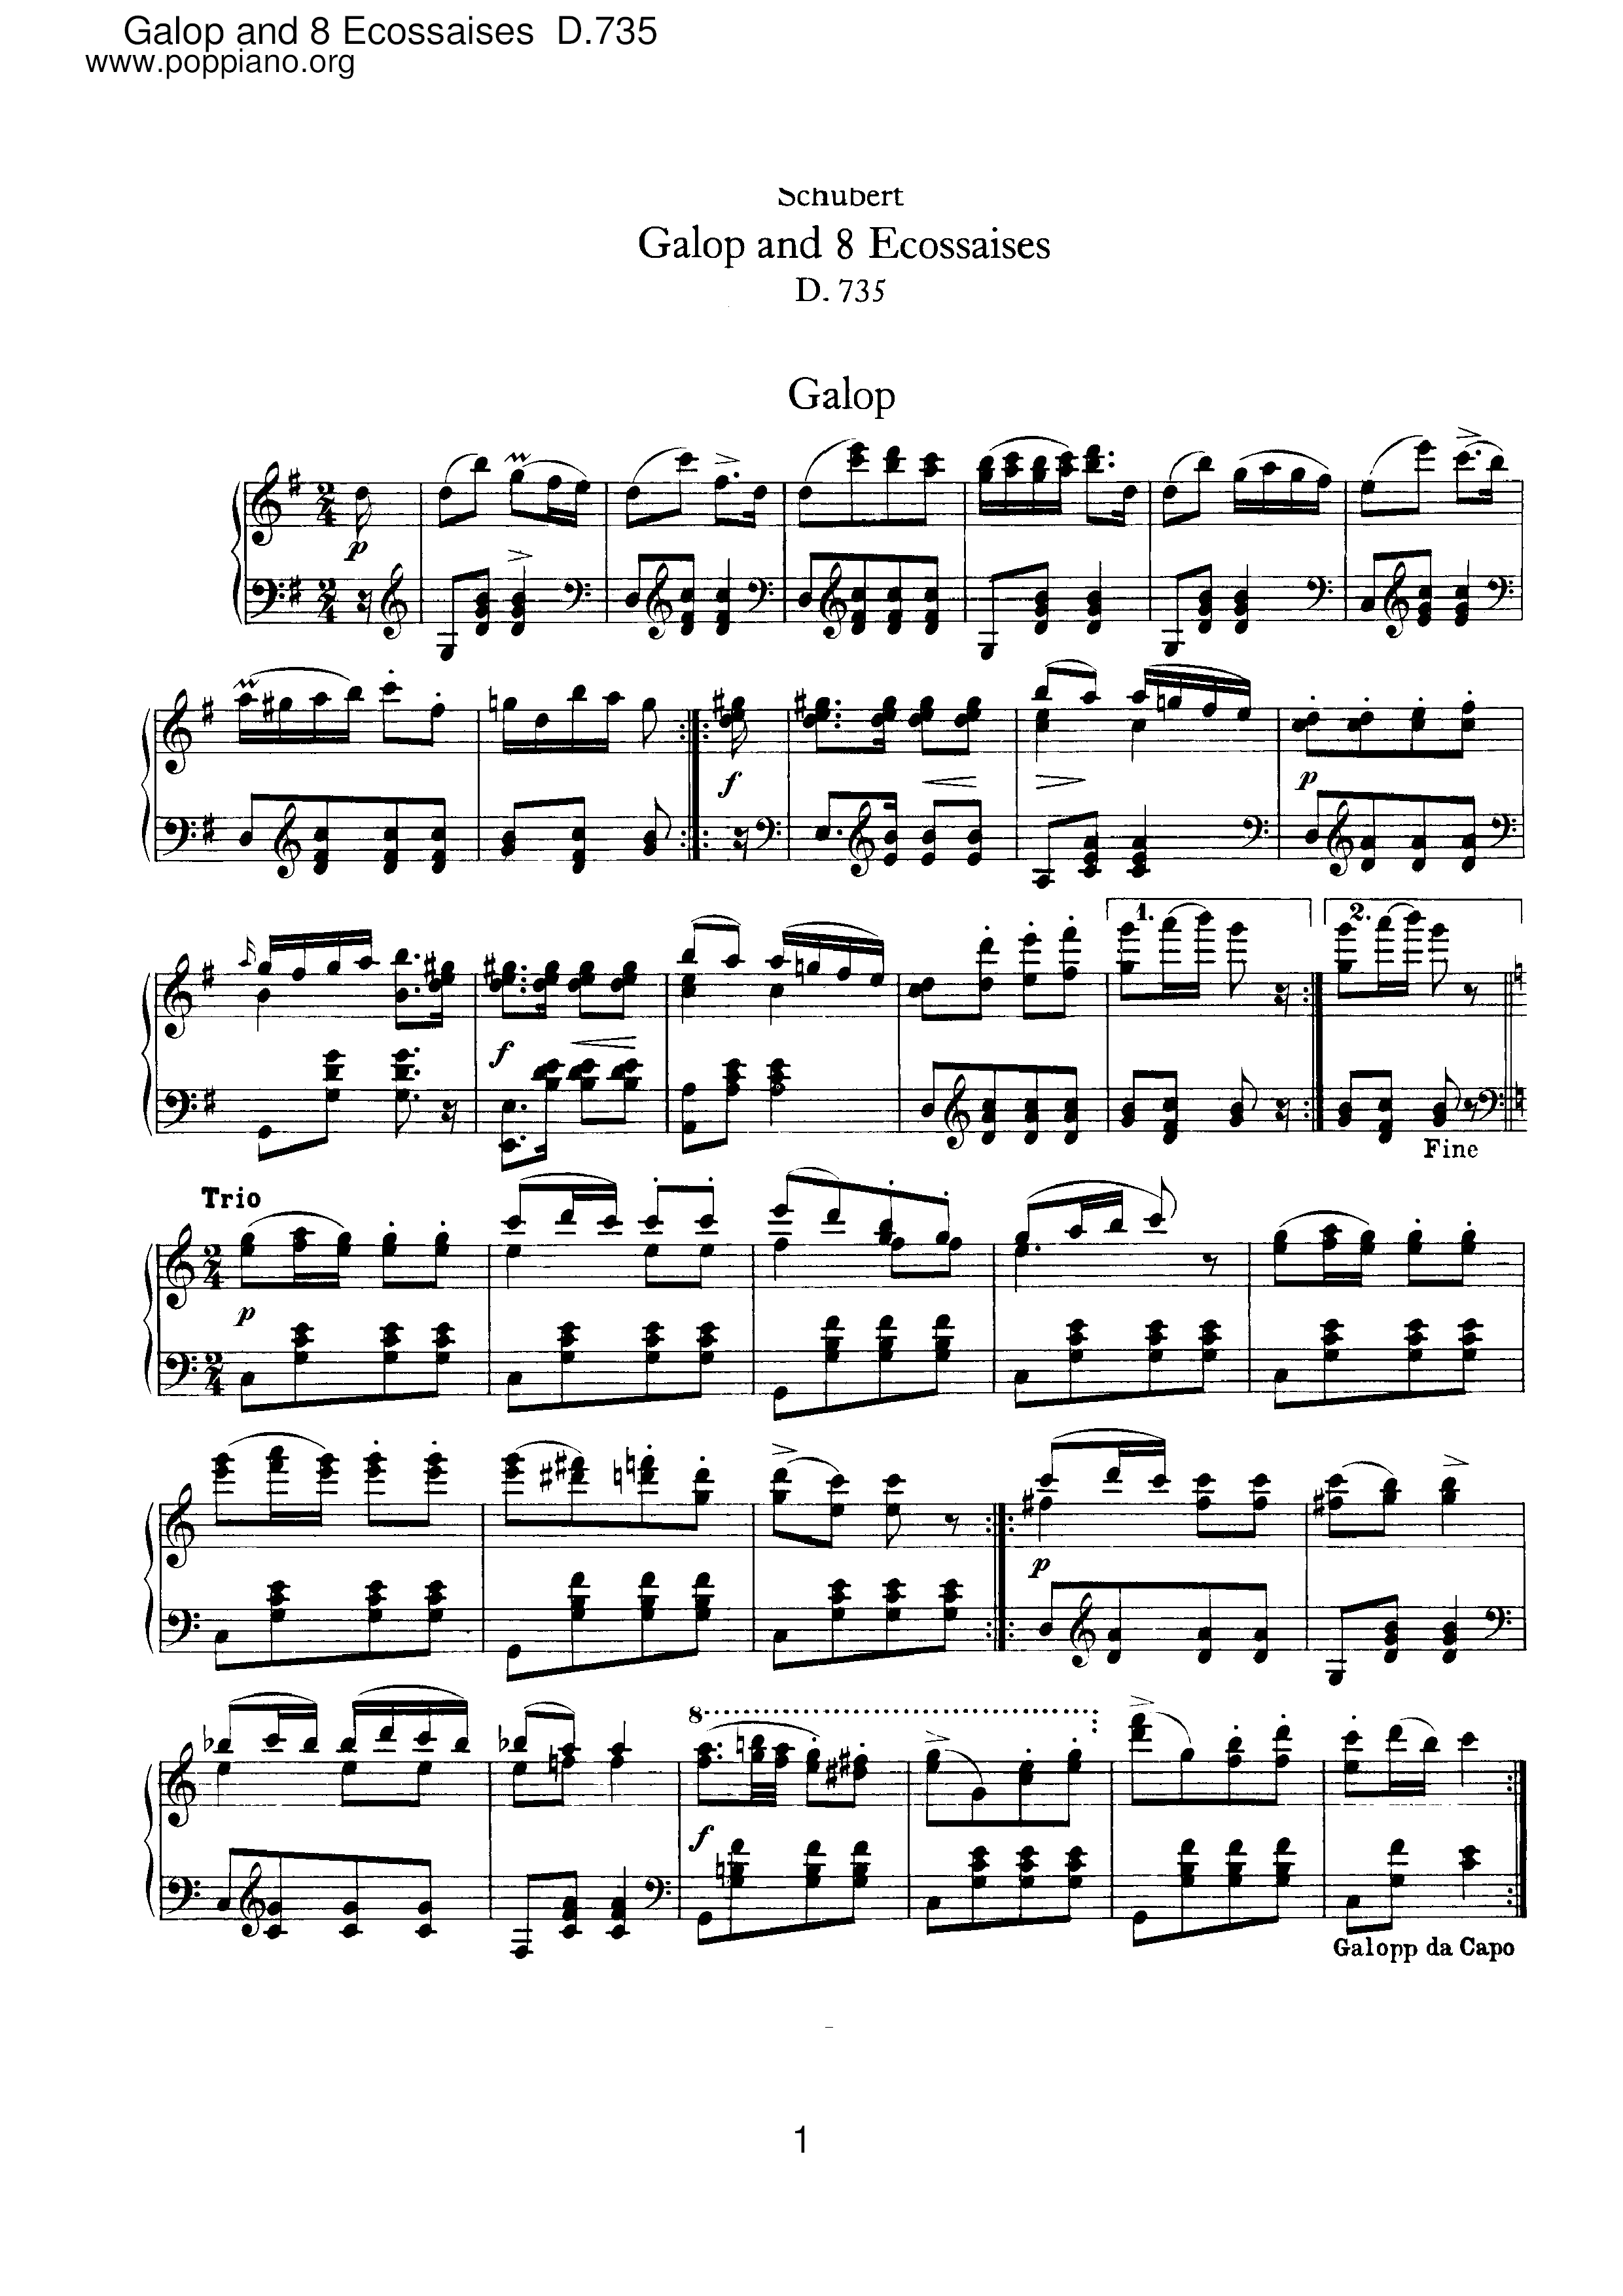 Galop and 8 Ecossaises, D.735 Score